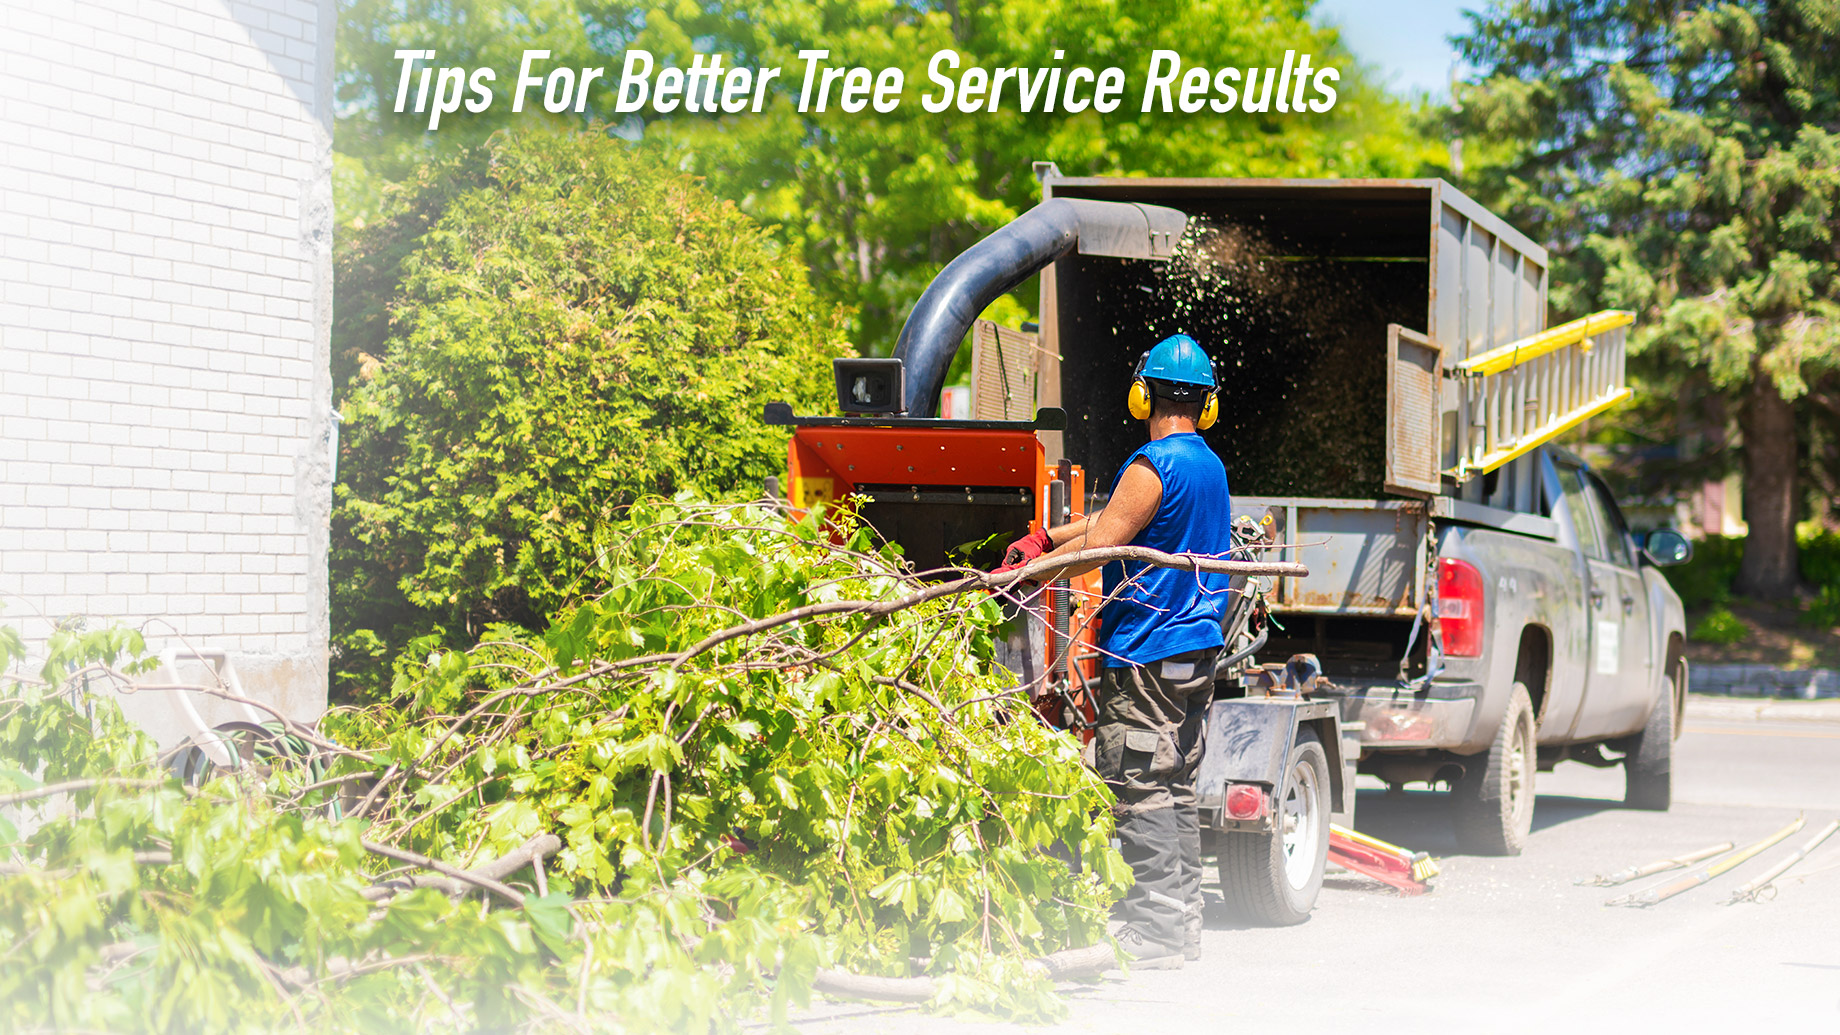 Tips For Better Tree Service Results